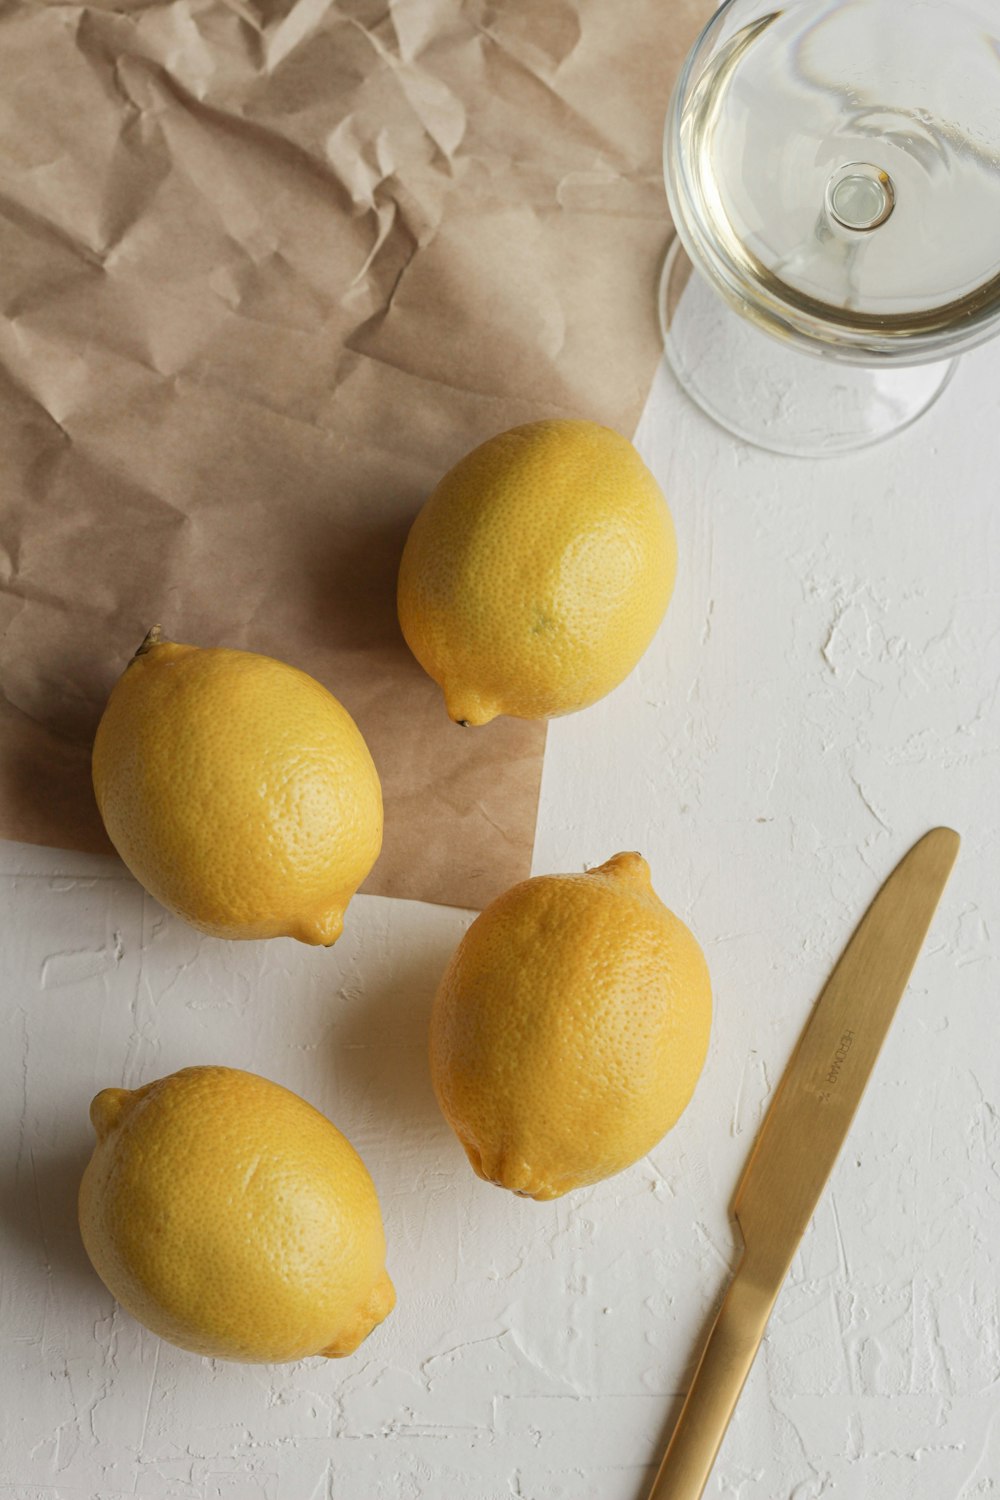 four lemons on a cutting board next to a knife